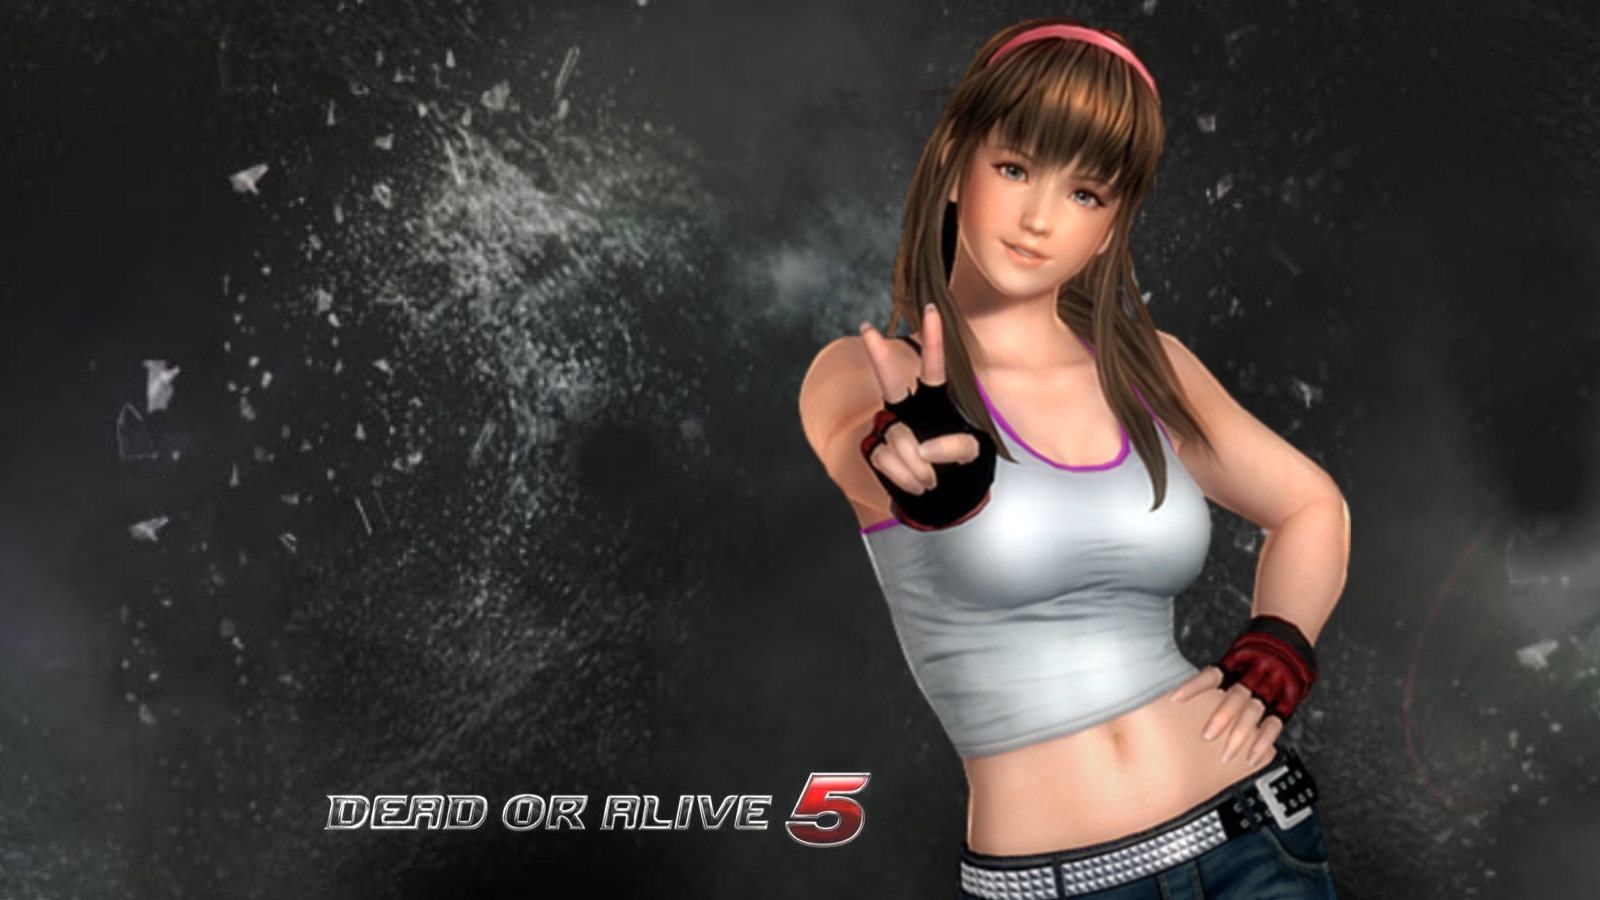 Image Hitomi Dead Or Alive Fanmade Wallpaper Pc Android